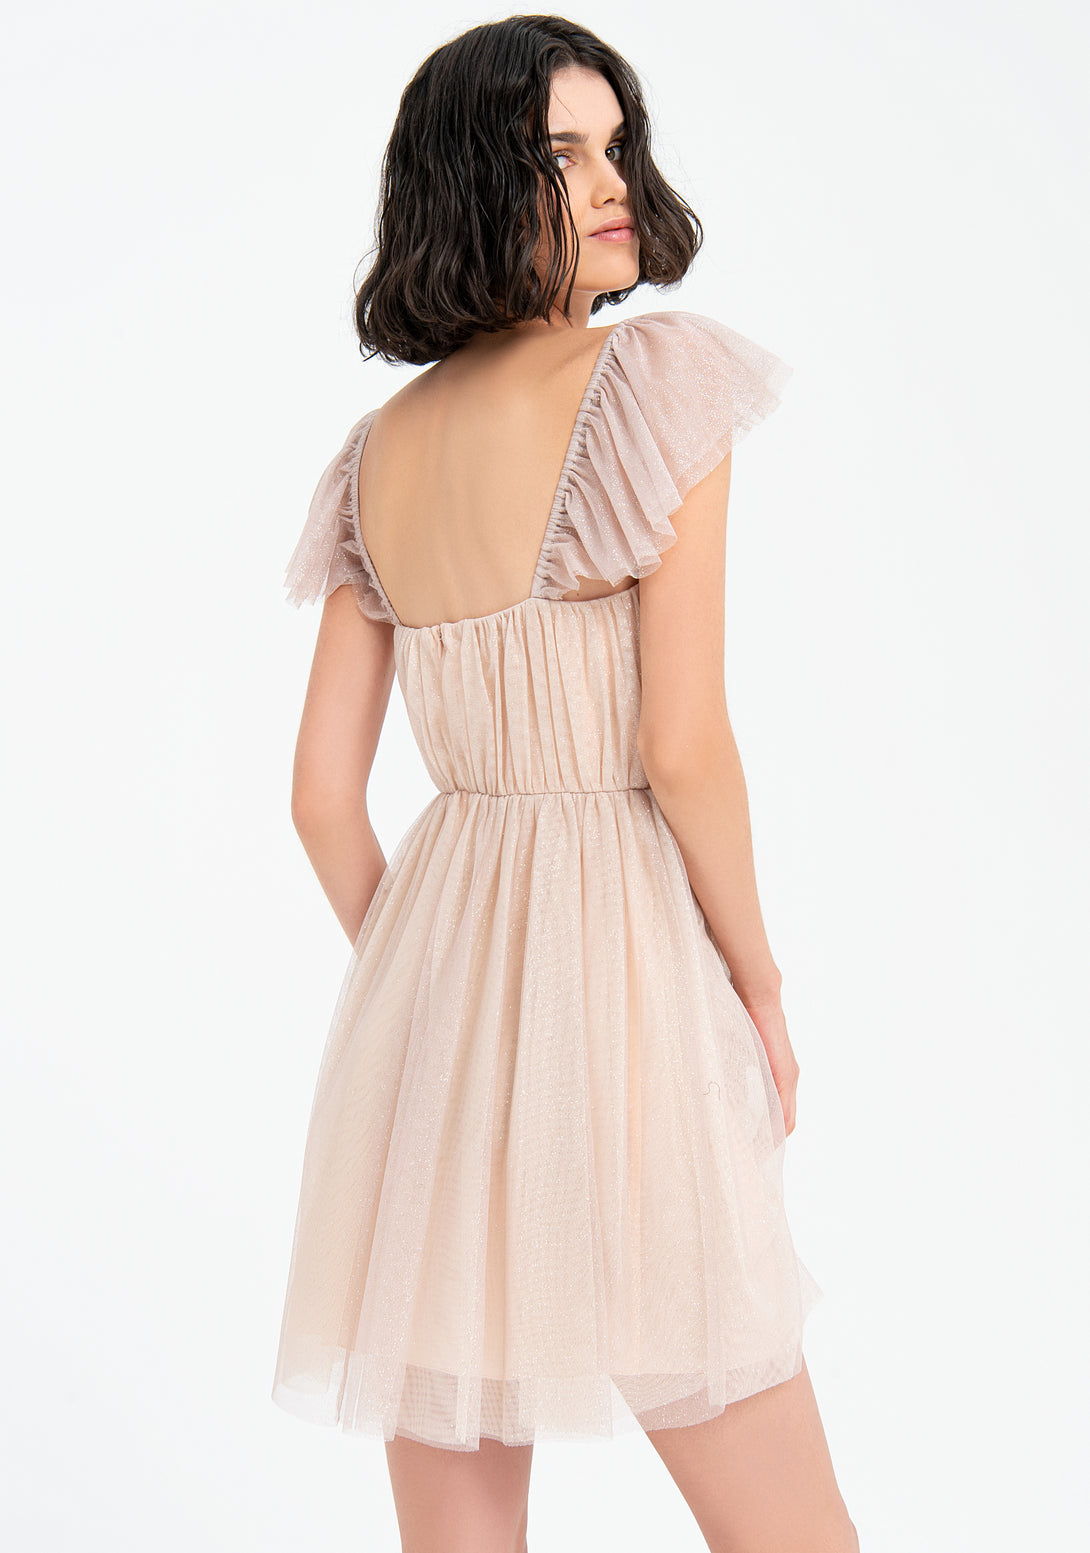 Dress with no sleeves, long, with plissè effect